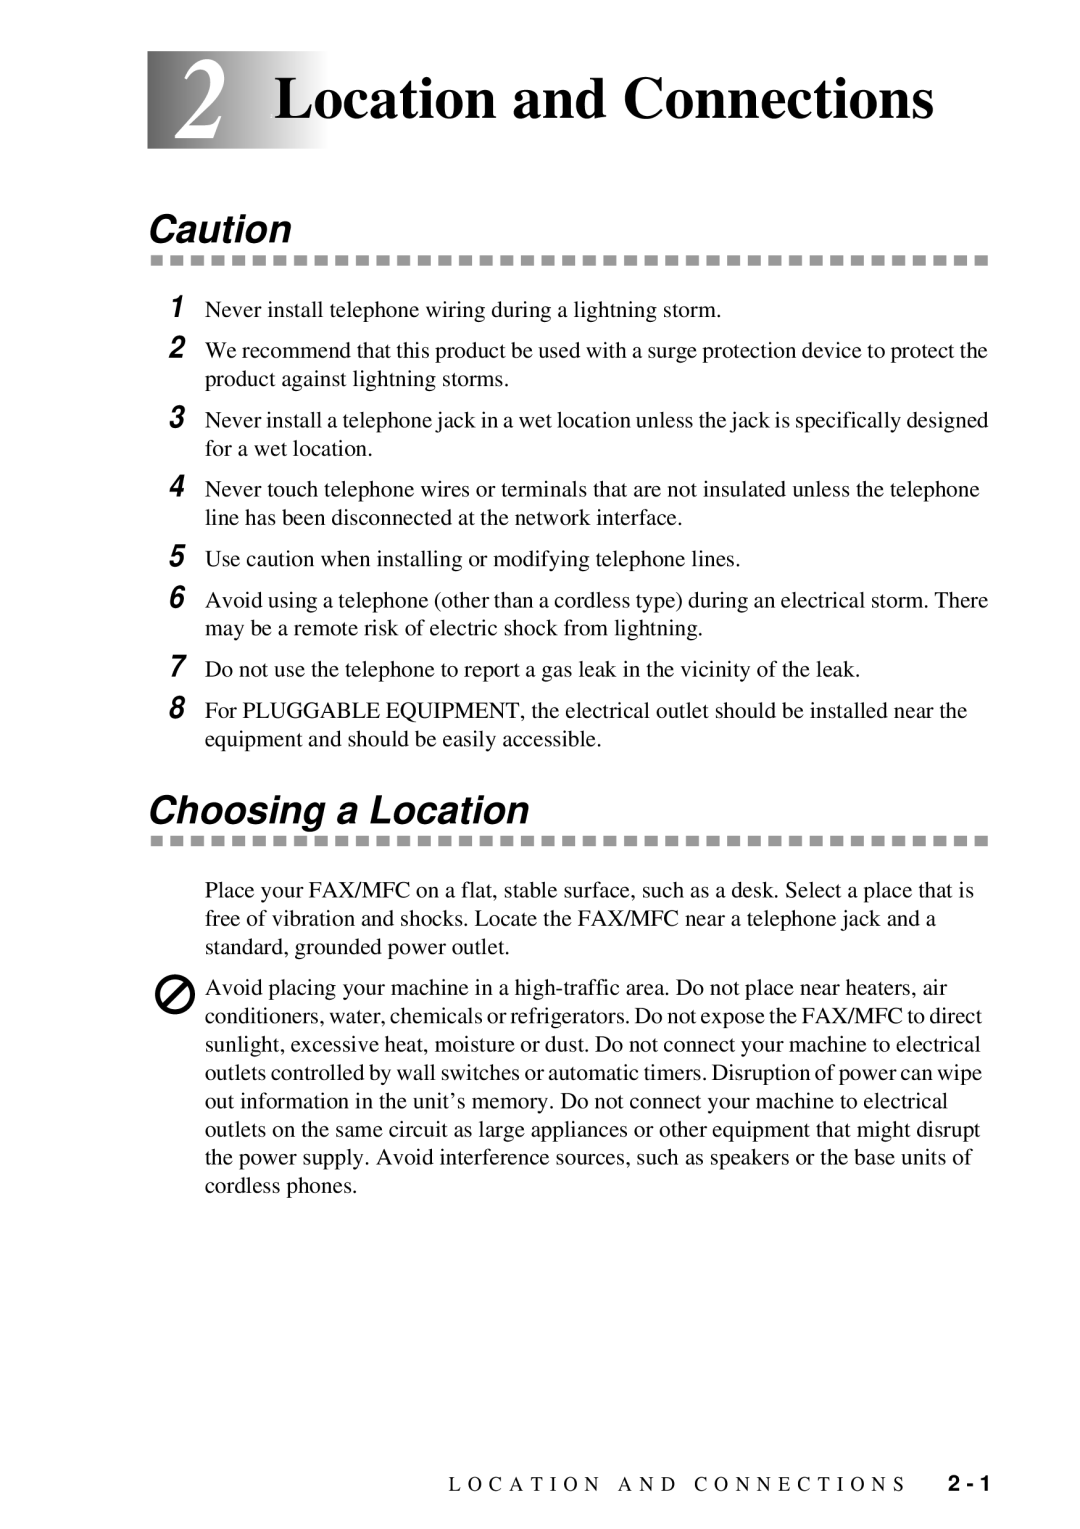 Brother FAX 580MC owner manual Location and Connections, Choosing a Location 